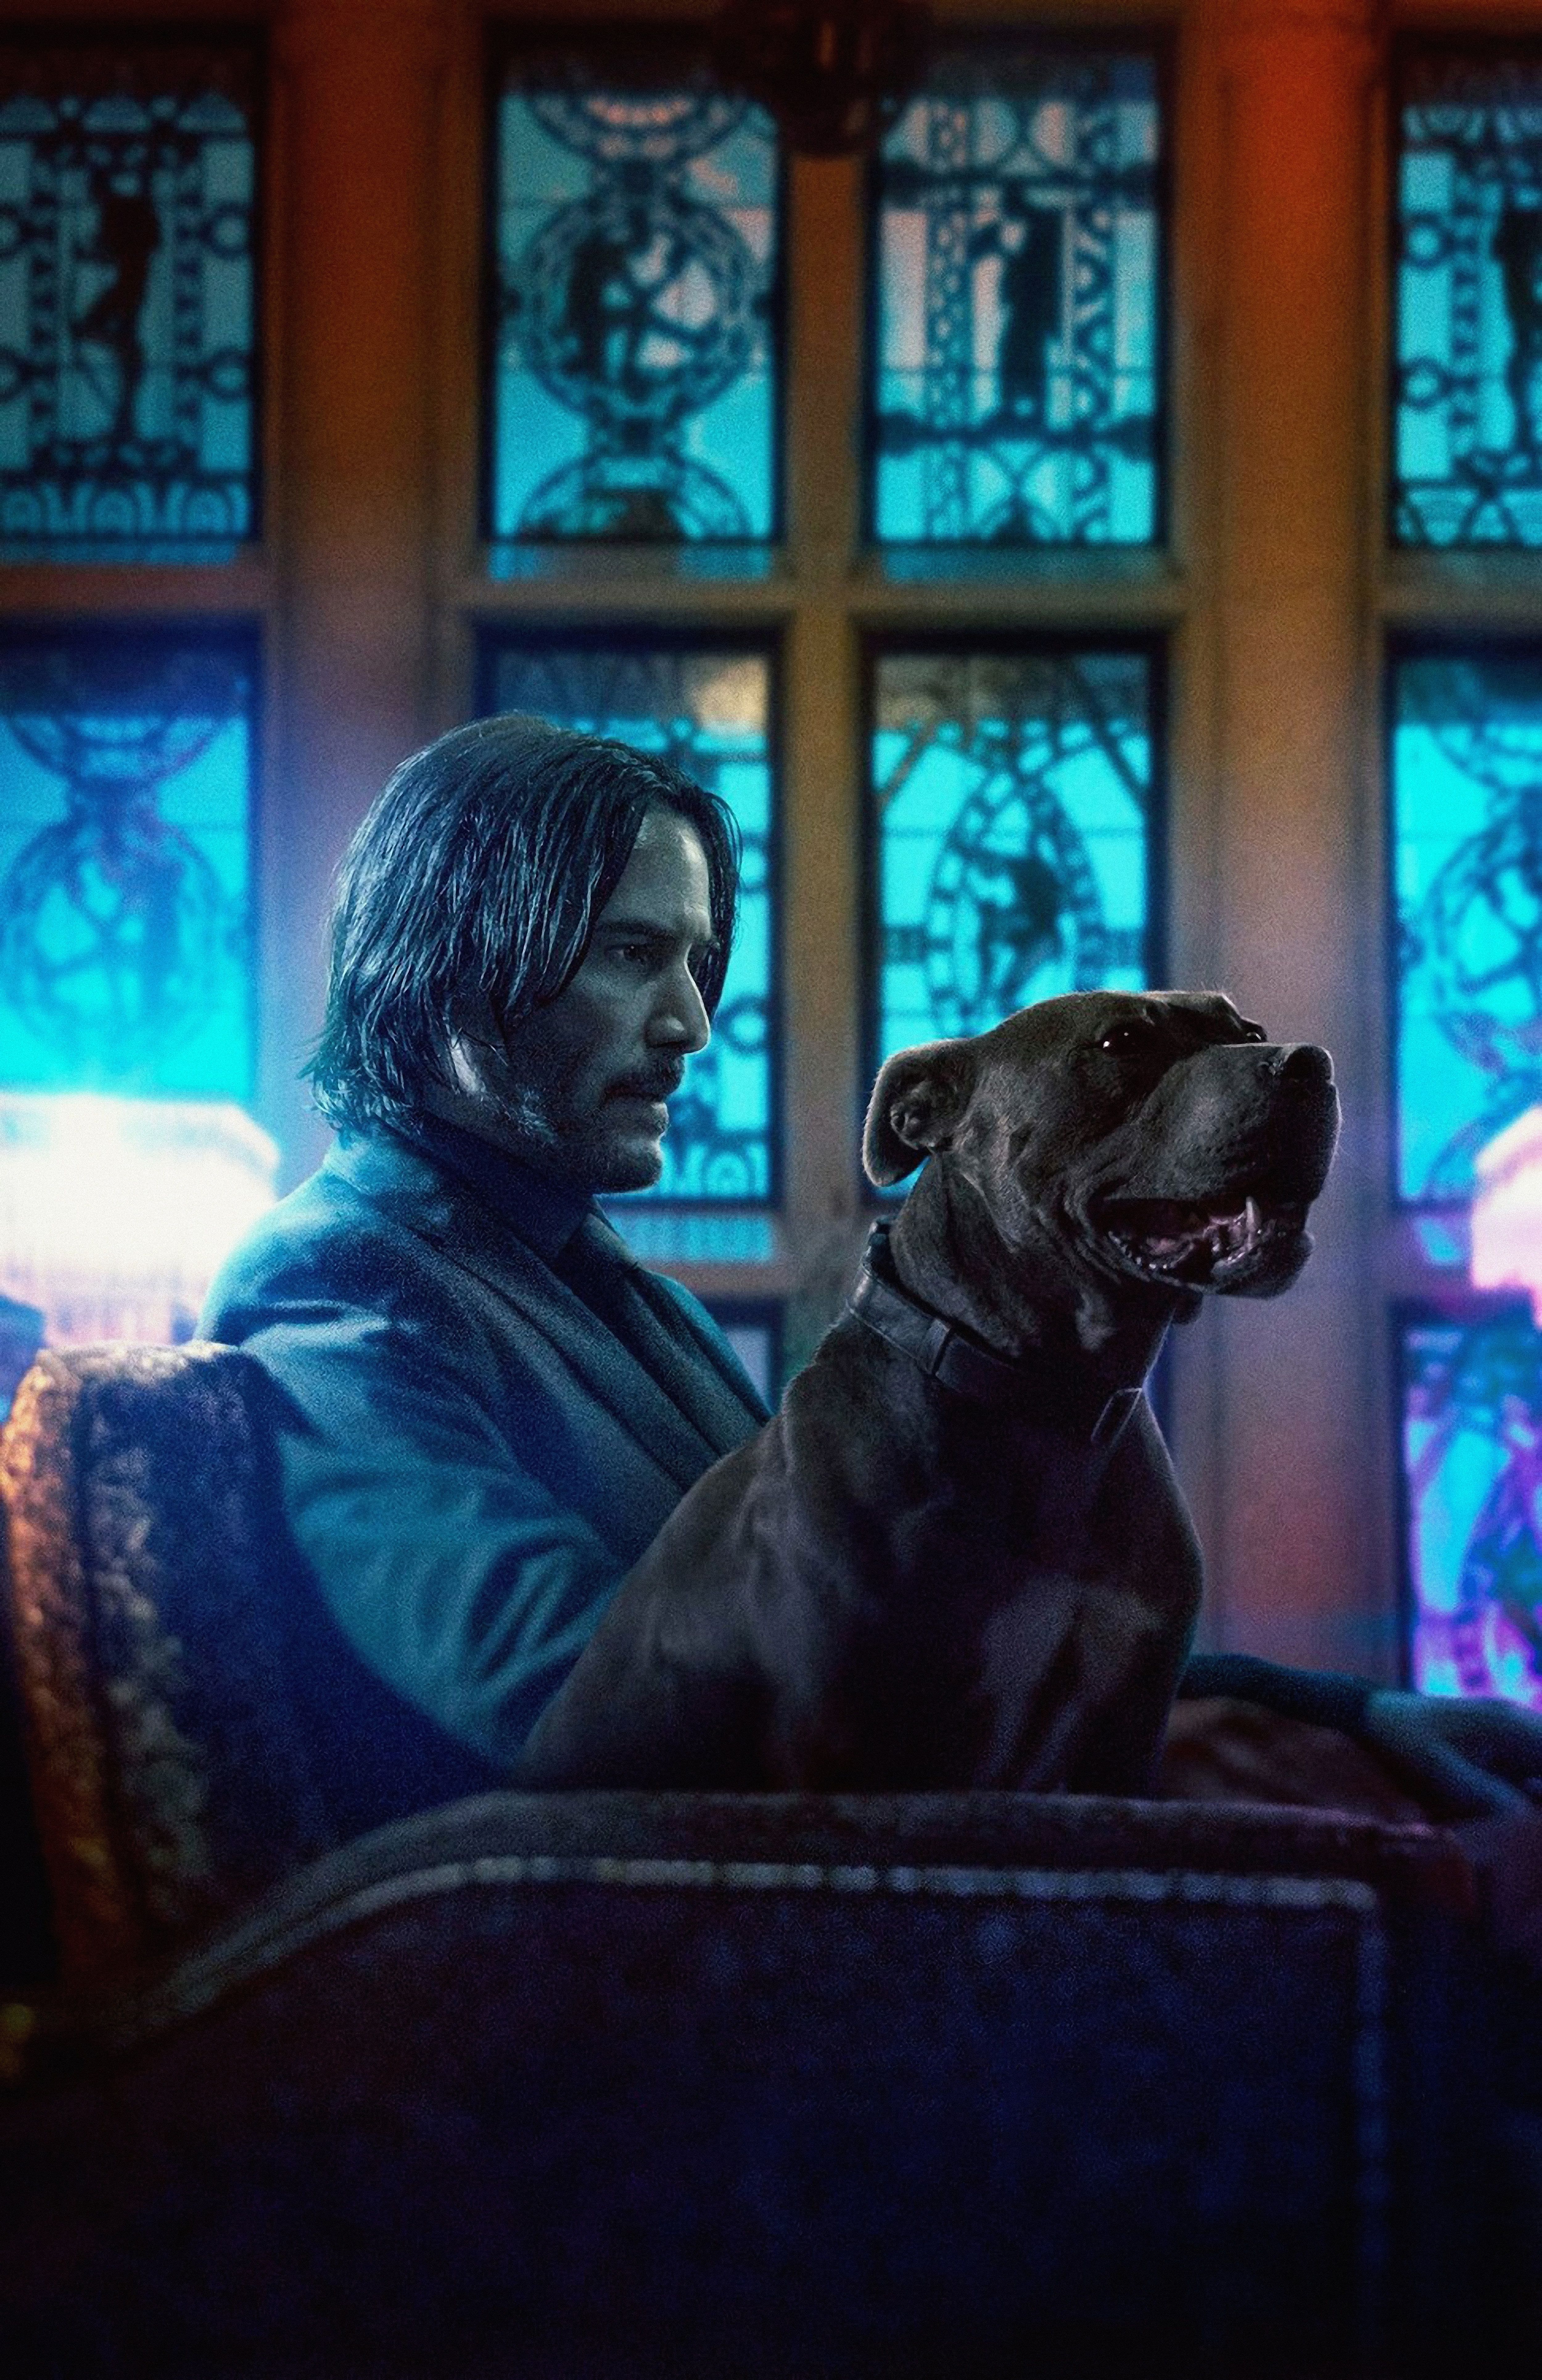 John Wick Chapter 3 Samsung Galaxy Note S S SQHD Wallpaper, HD Movies 4K Wallpaper, Image, Photo and Background